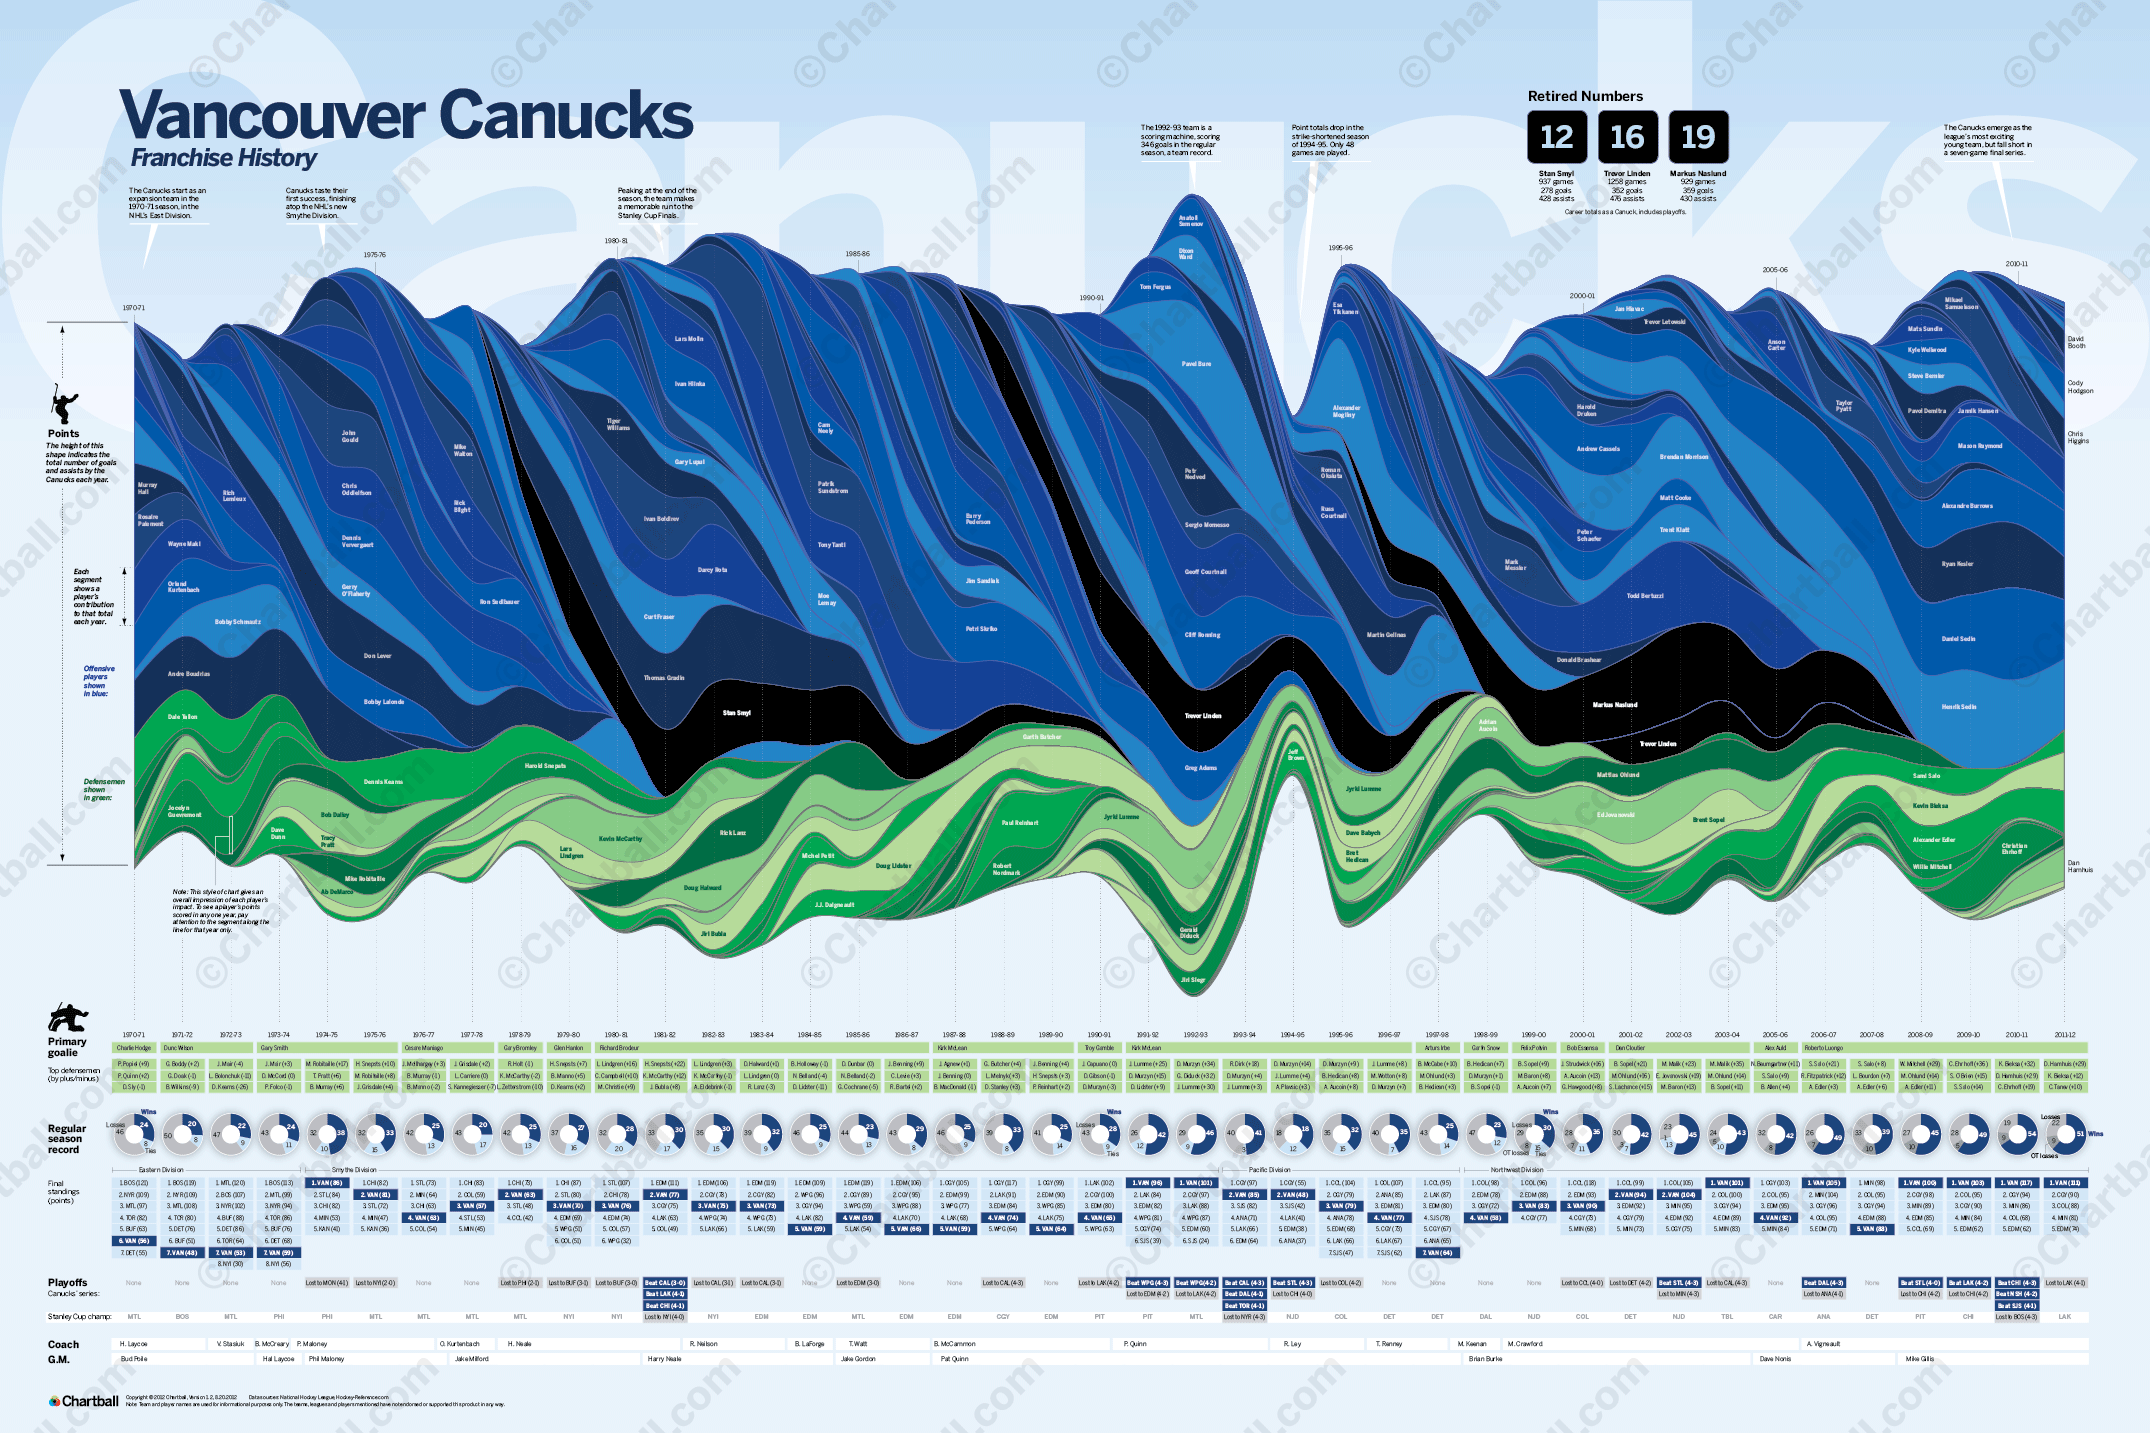 Vancouver Canucks franchise history Infographic